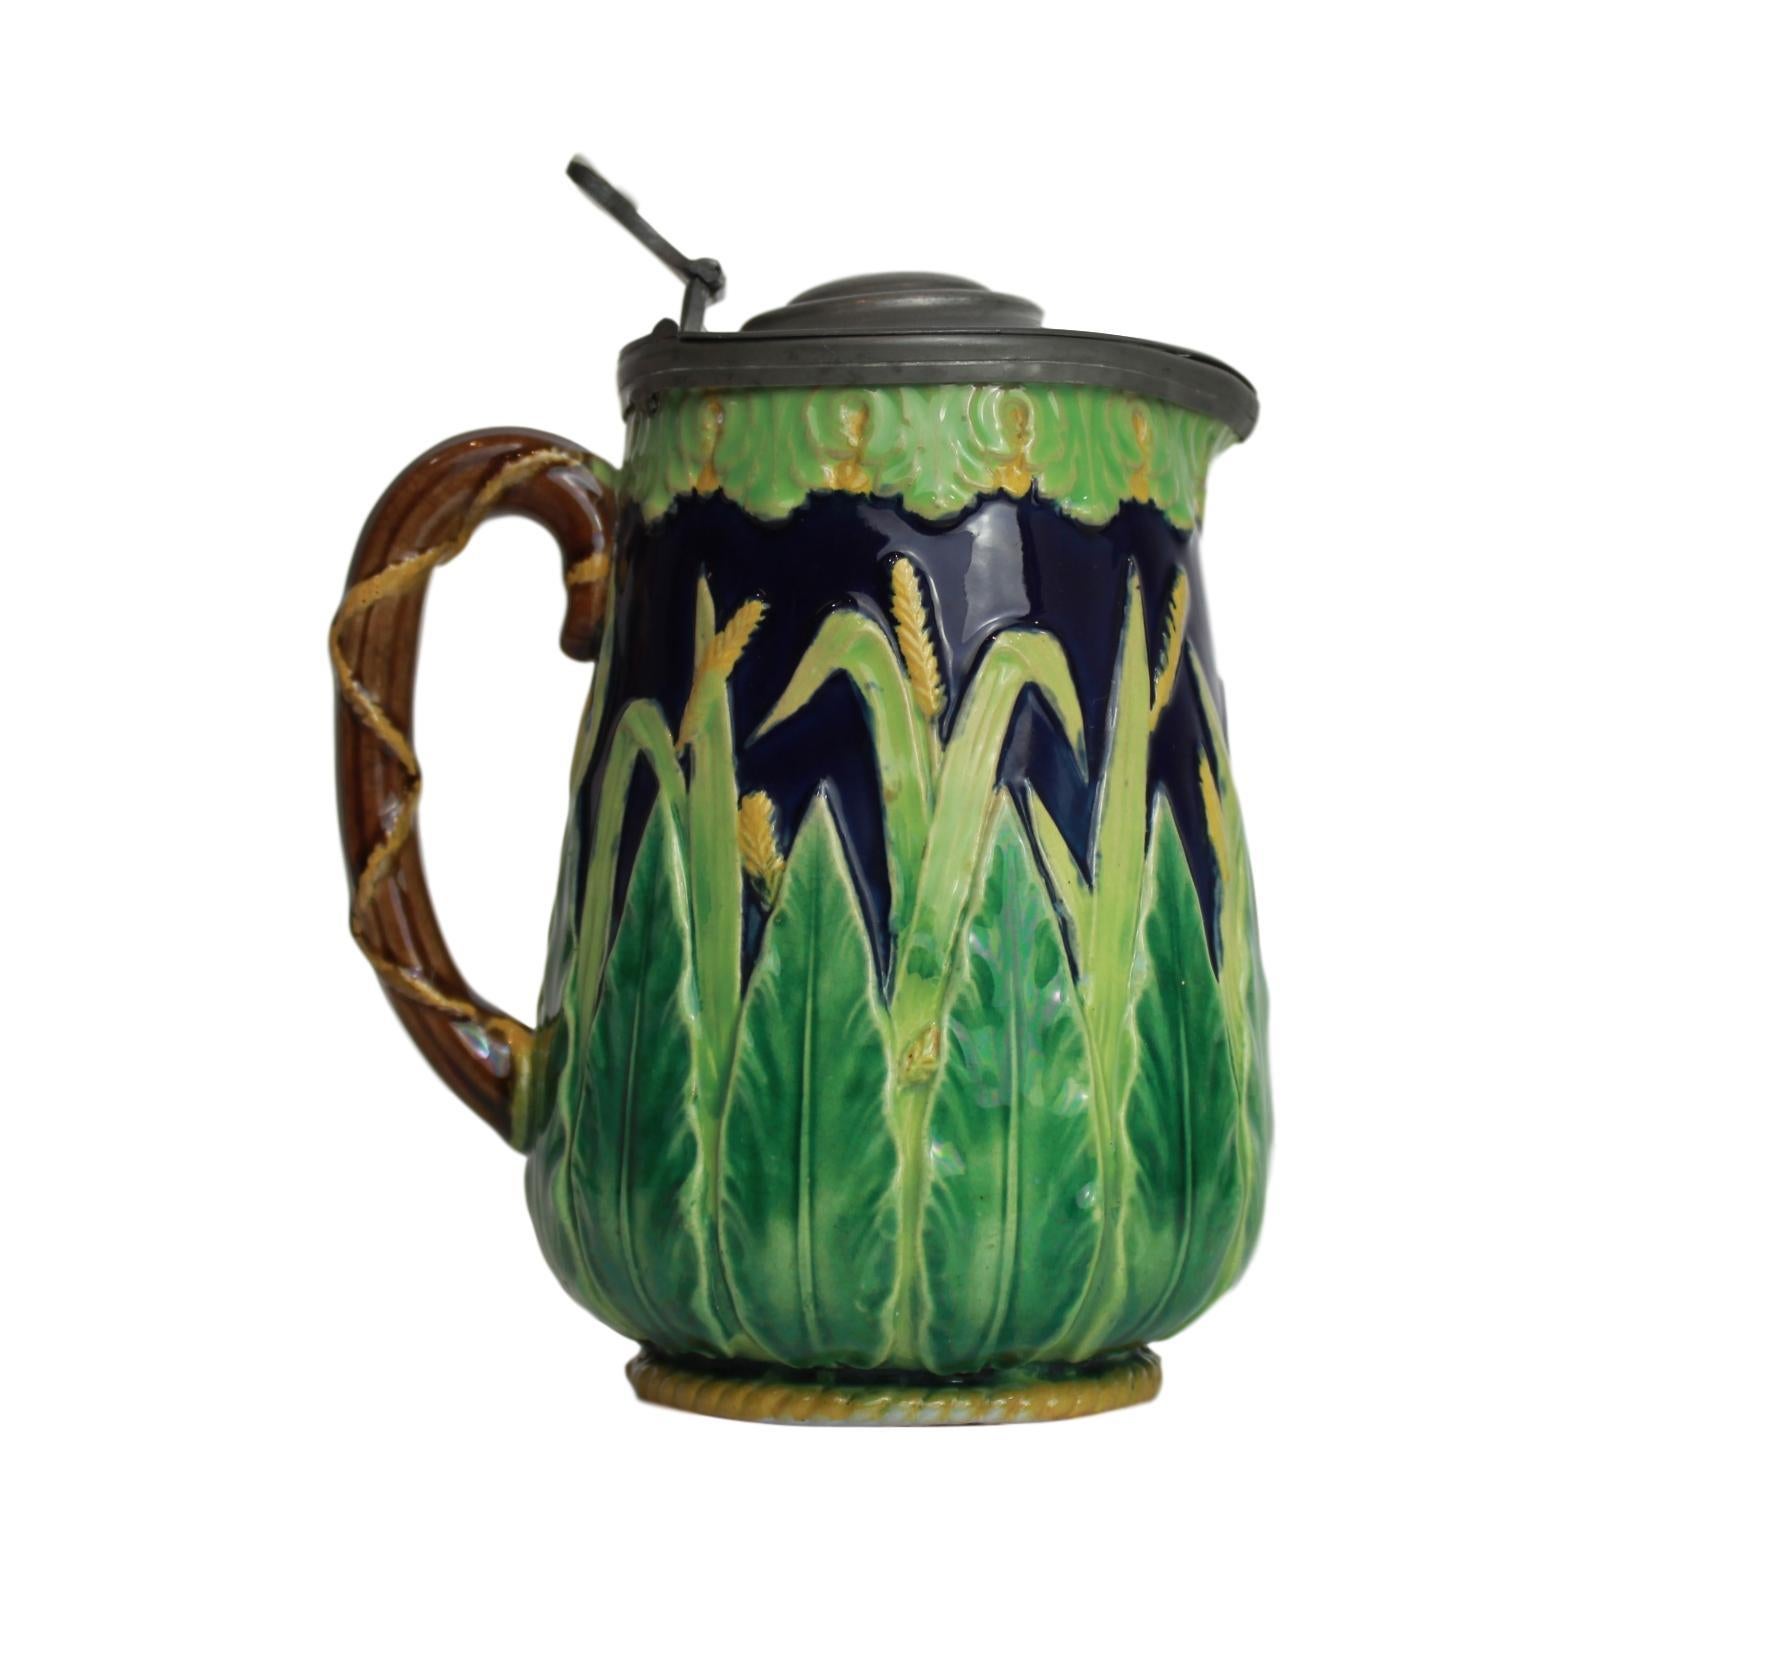 George Jones Majolica Cobalt blue wheat pitcher with pewter lid, English circa 1873, the body molded with acanthus leaves glazed in varying shades of green, with naturalistically glazed green and yellow wheat sheaves, with yellow glazed roping to